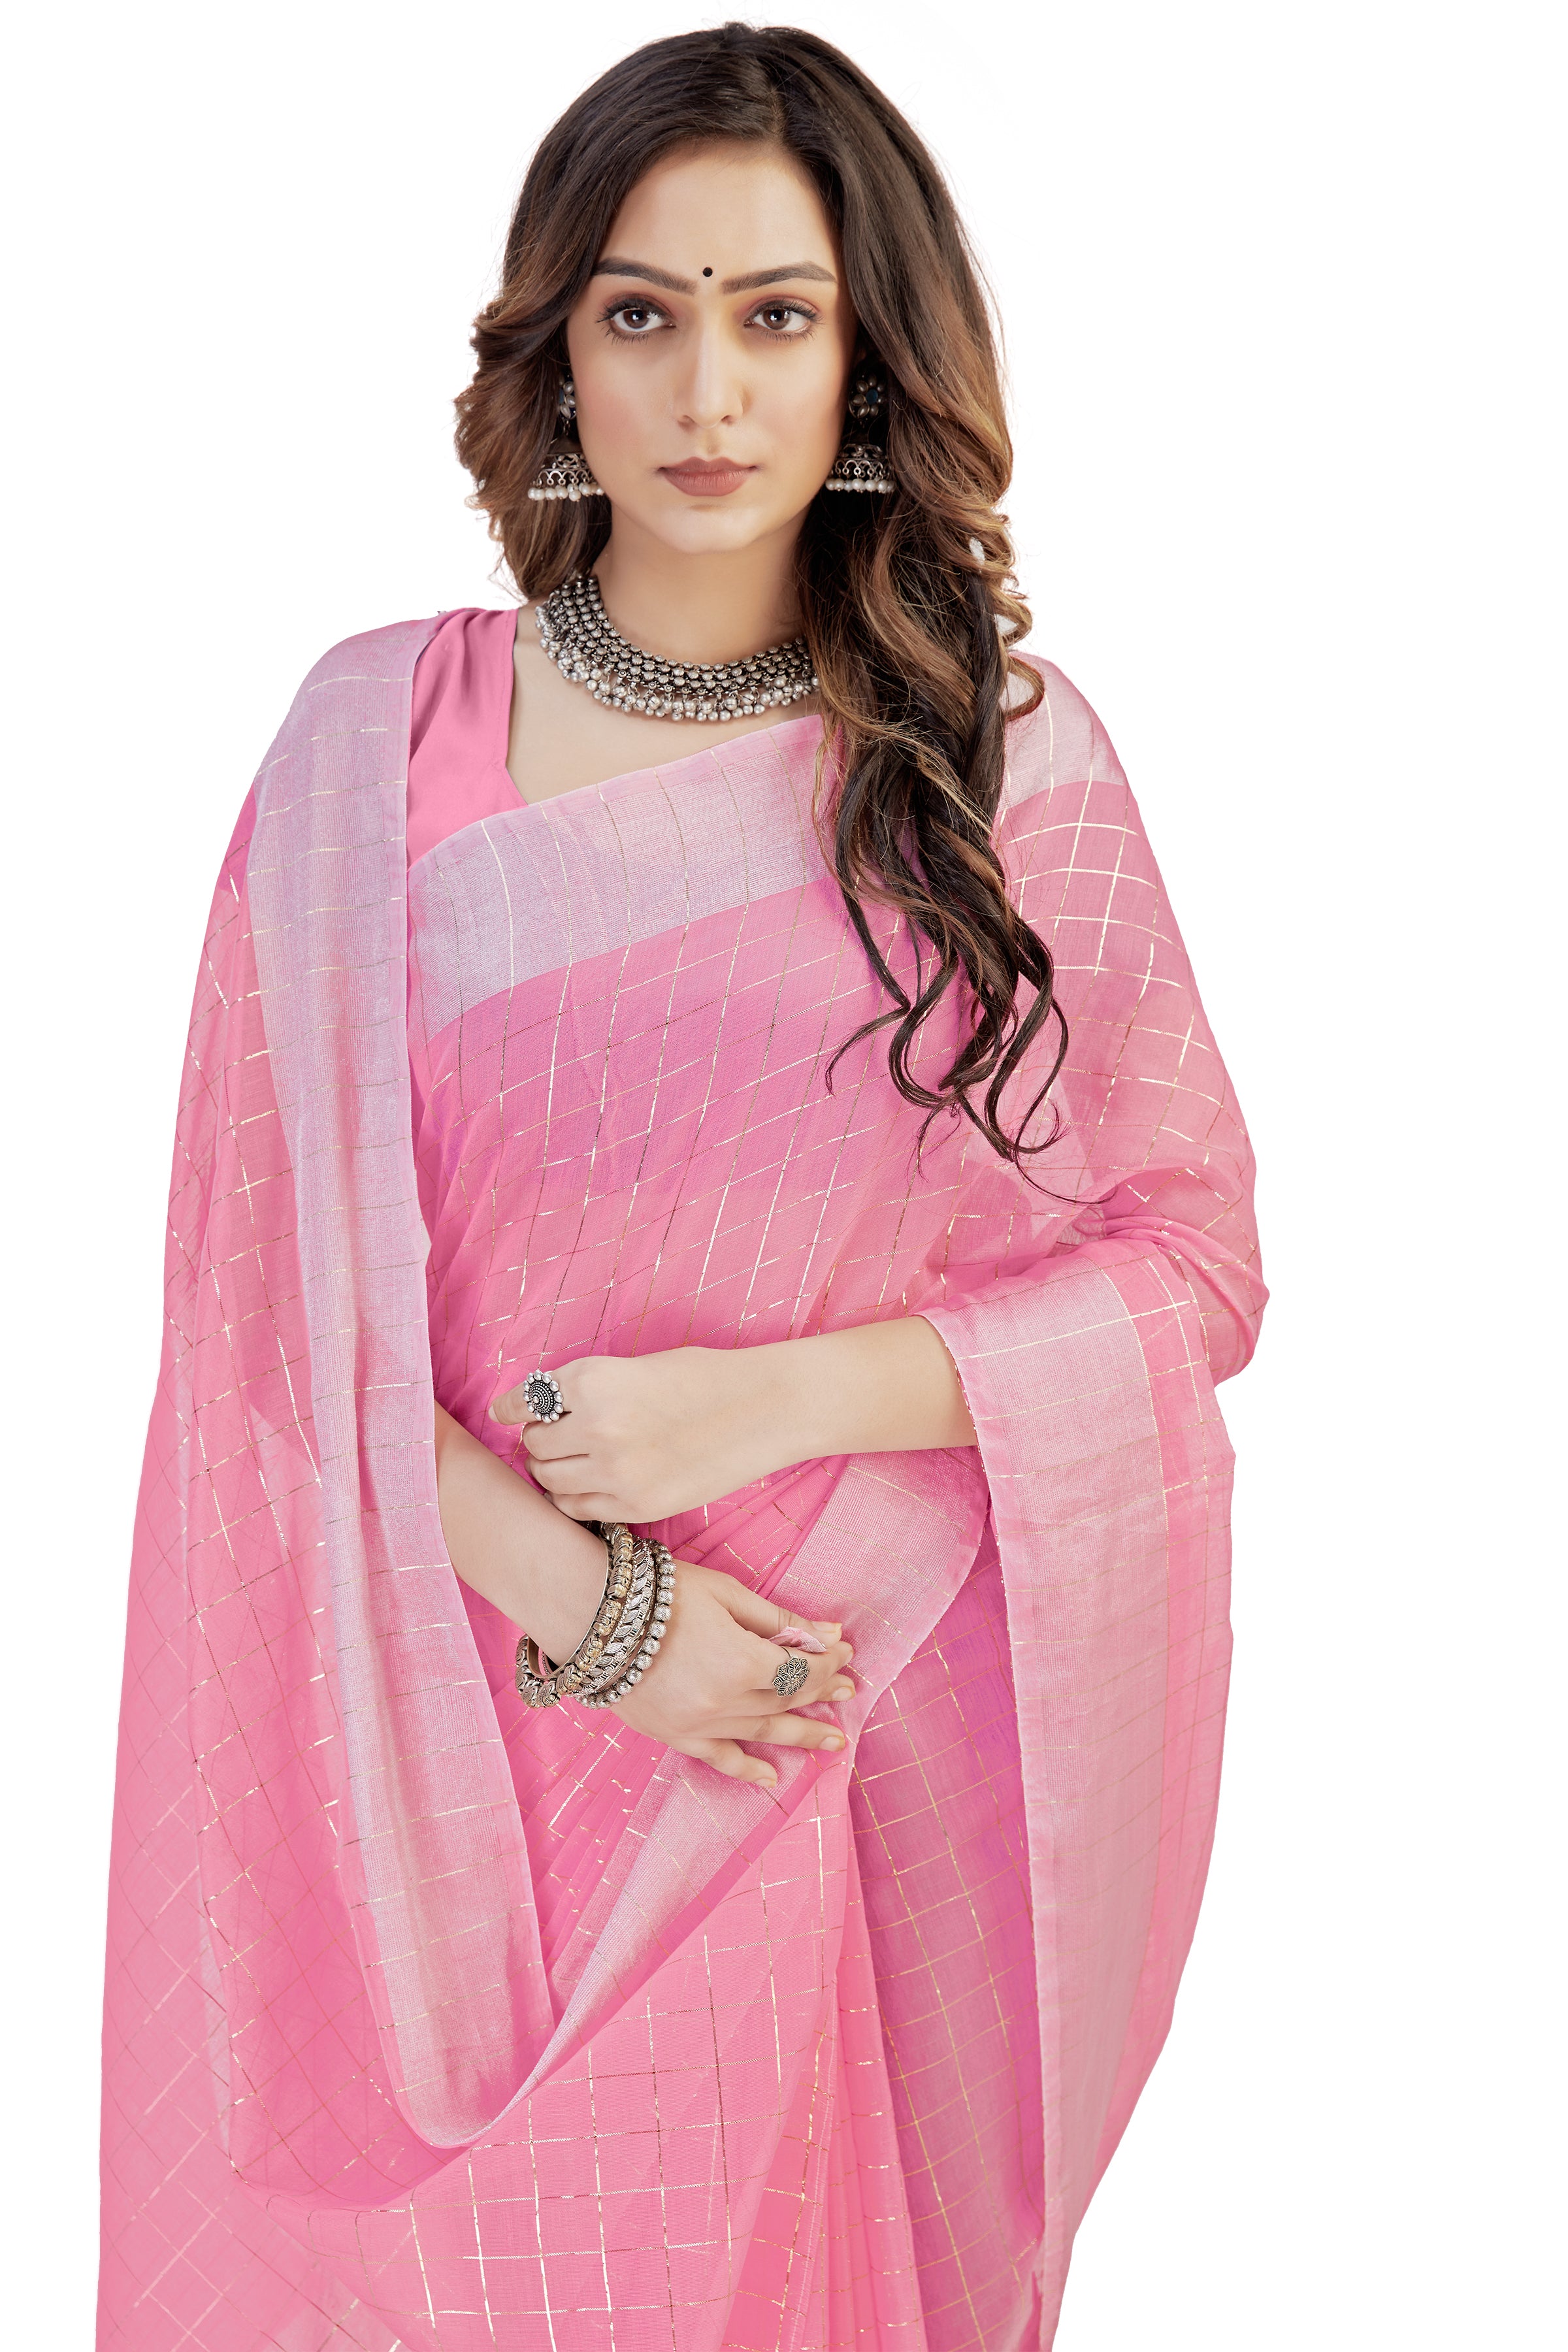 Women's self Woven Checked Daily Wear Cotton Blend Sari With Blouse Piece (Pink) - NIMIDHYA